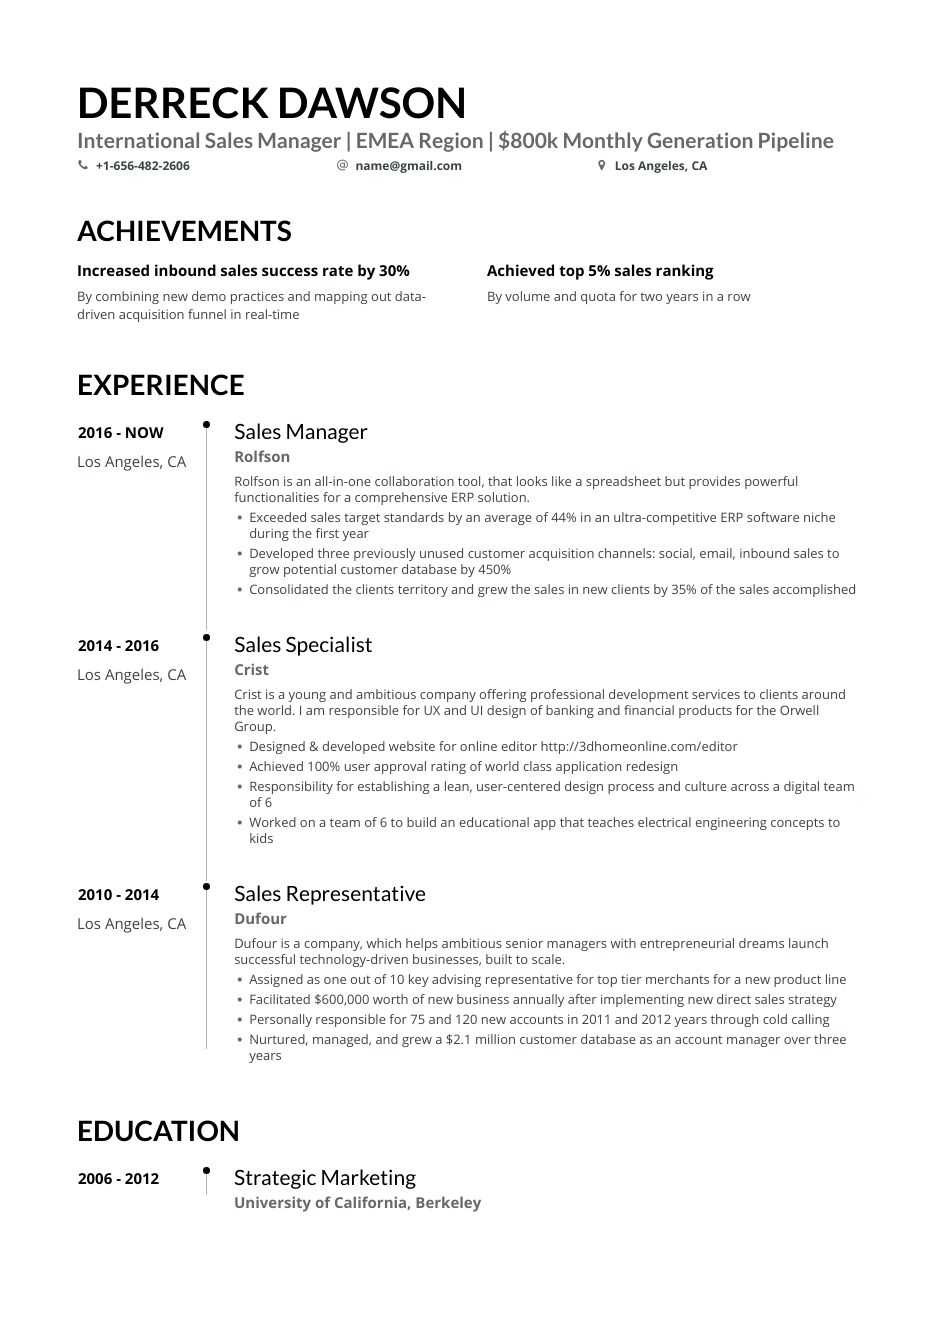 Sample Resume for Senior Sales Executive Sales Manager: Resume Examples for 2021